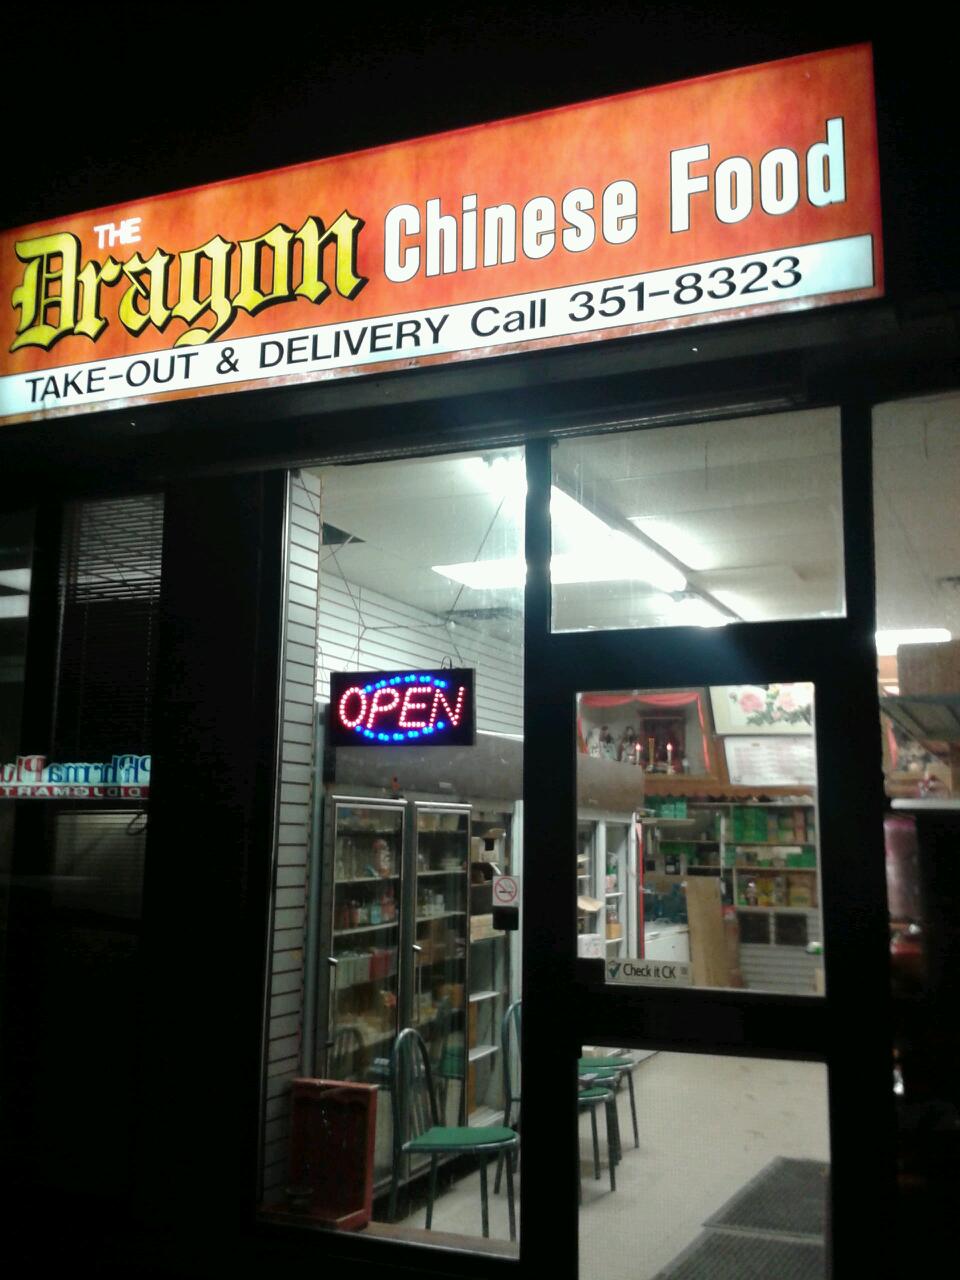 Dragon Chinese Food | 170 McNaughton Ave W, Chatham, ON N7L 1R2, Canada | Phone: (519) 351-8323